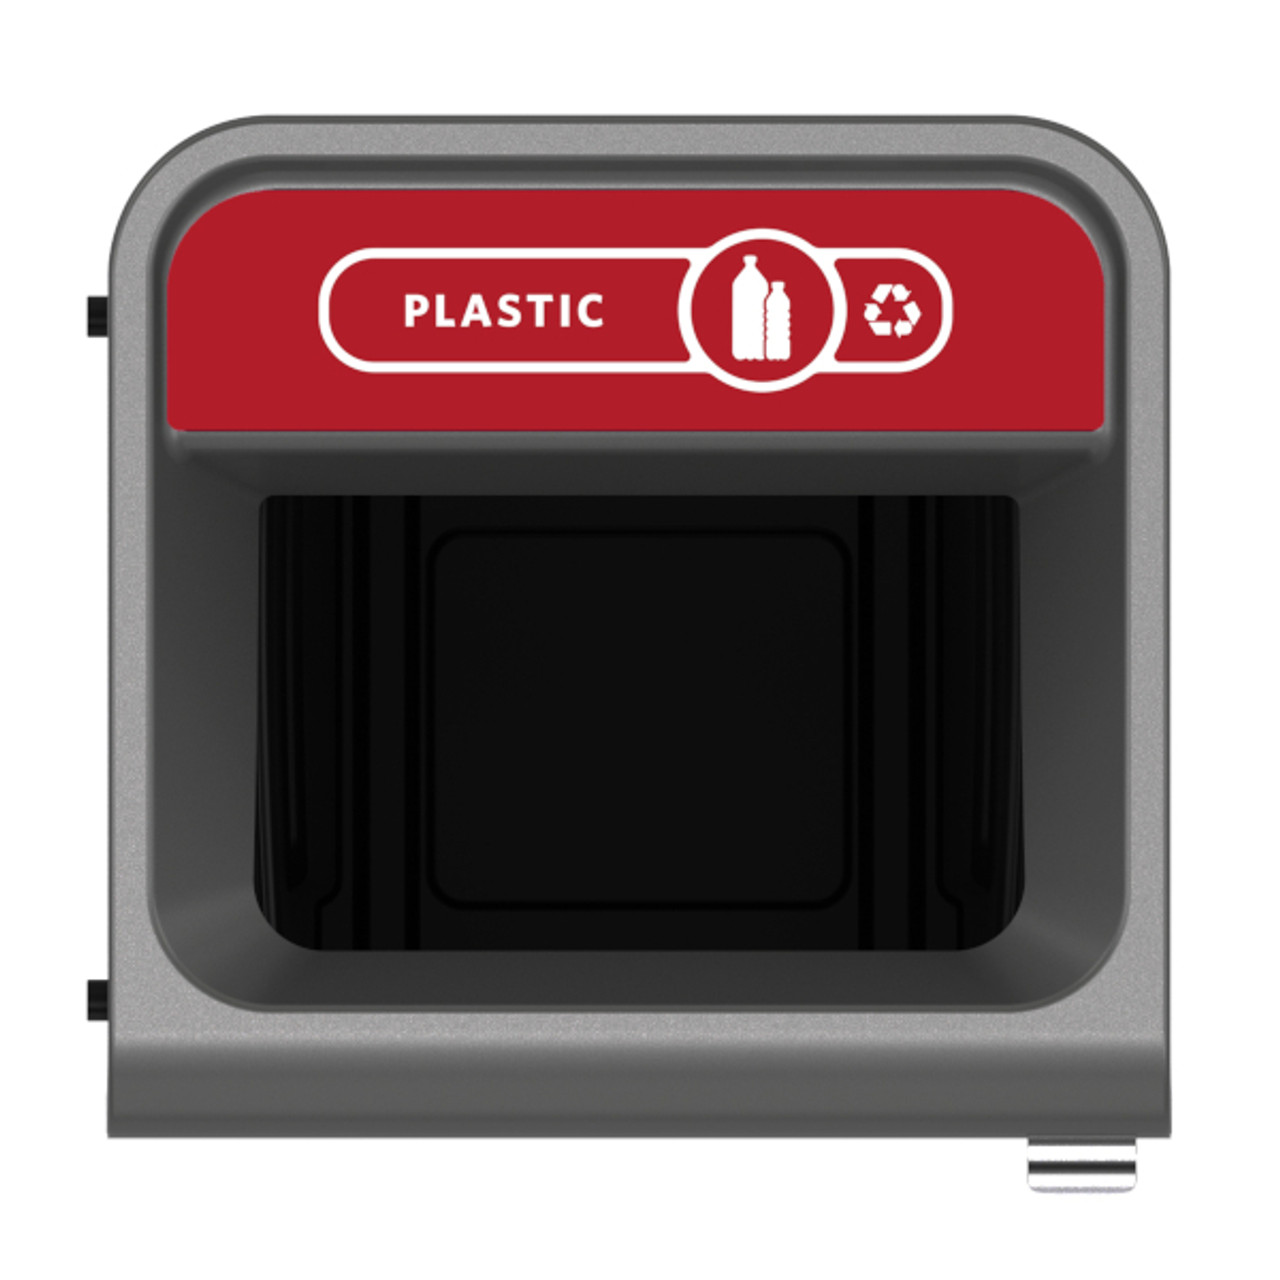 2154752 - Rubbermaid Configure Container with Plastic Recycling Label - 87 Ltr - Red - Large opening makes disposal of plastic recycling easy